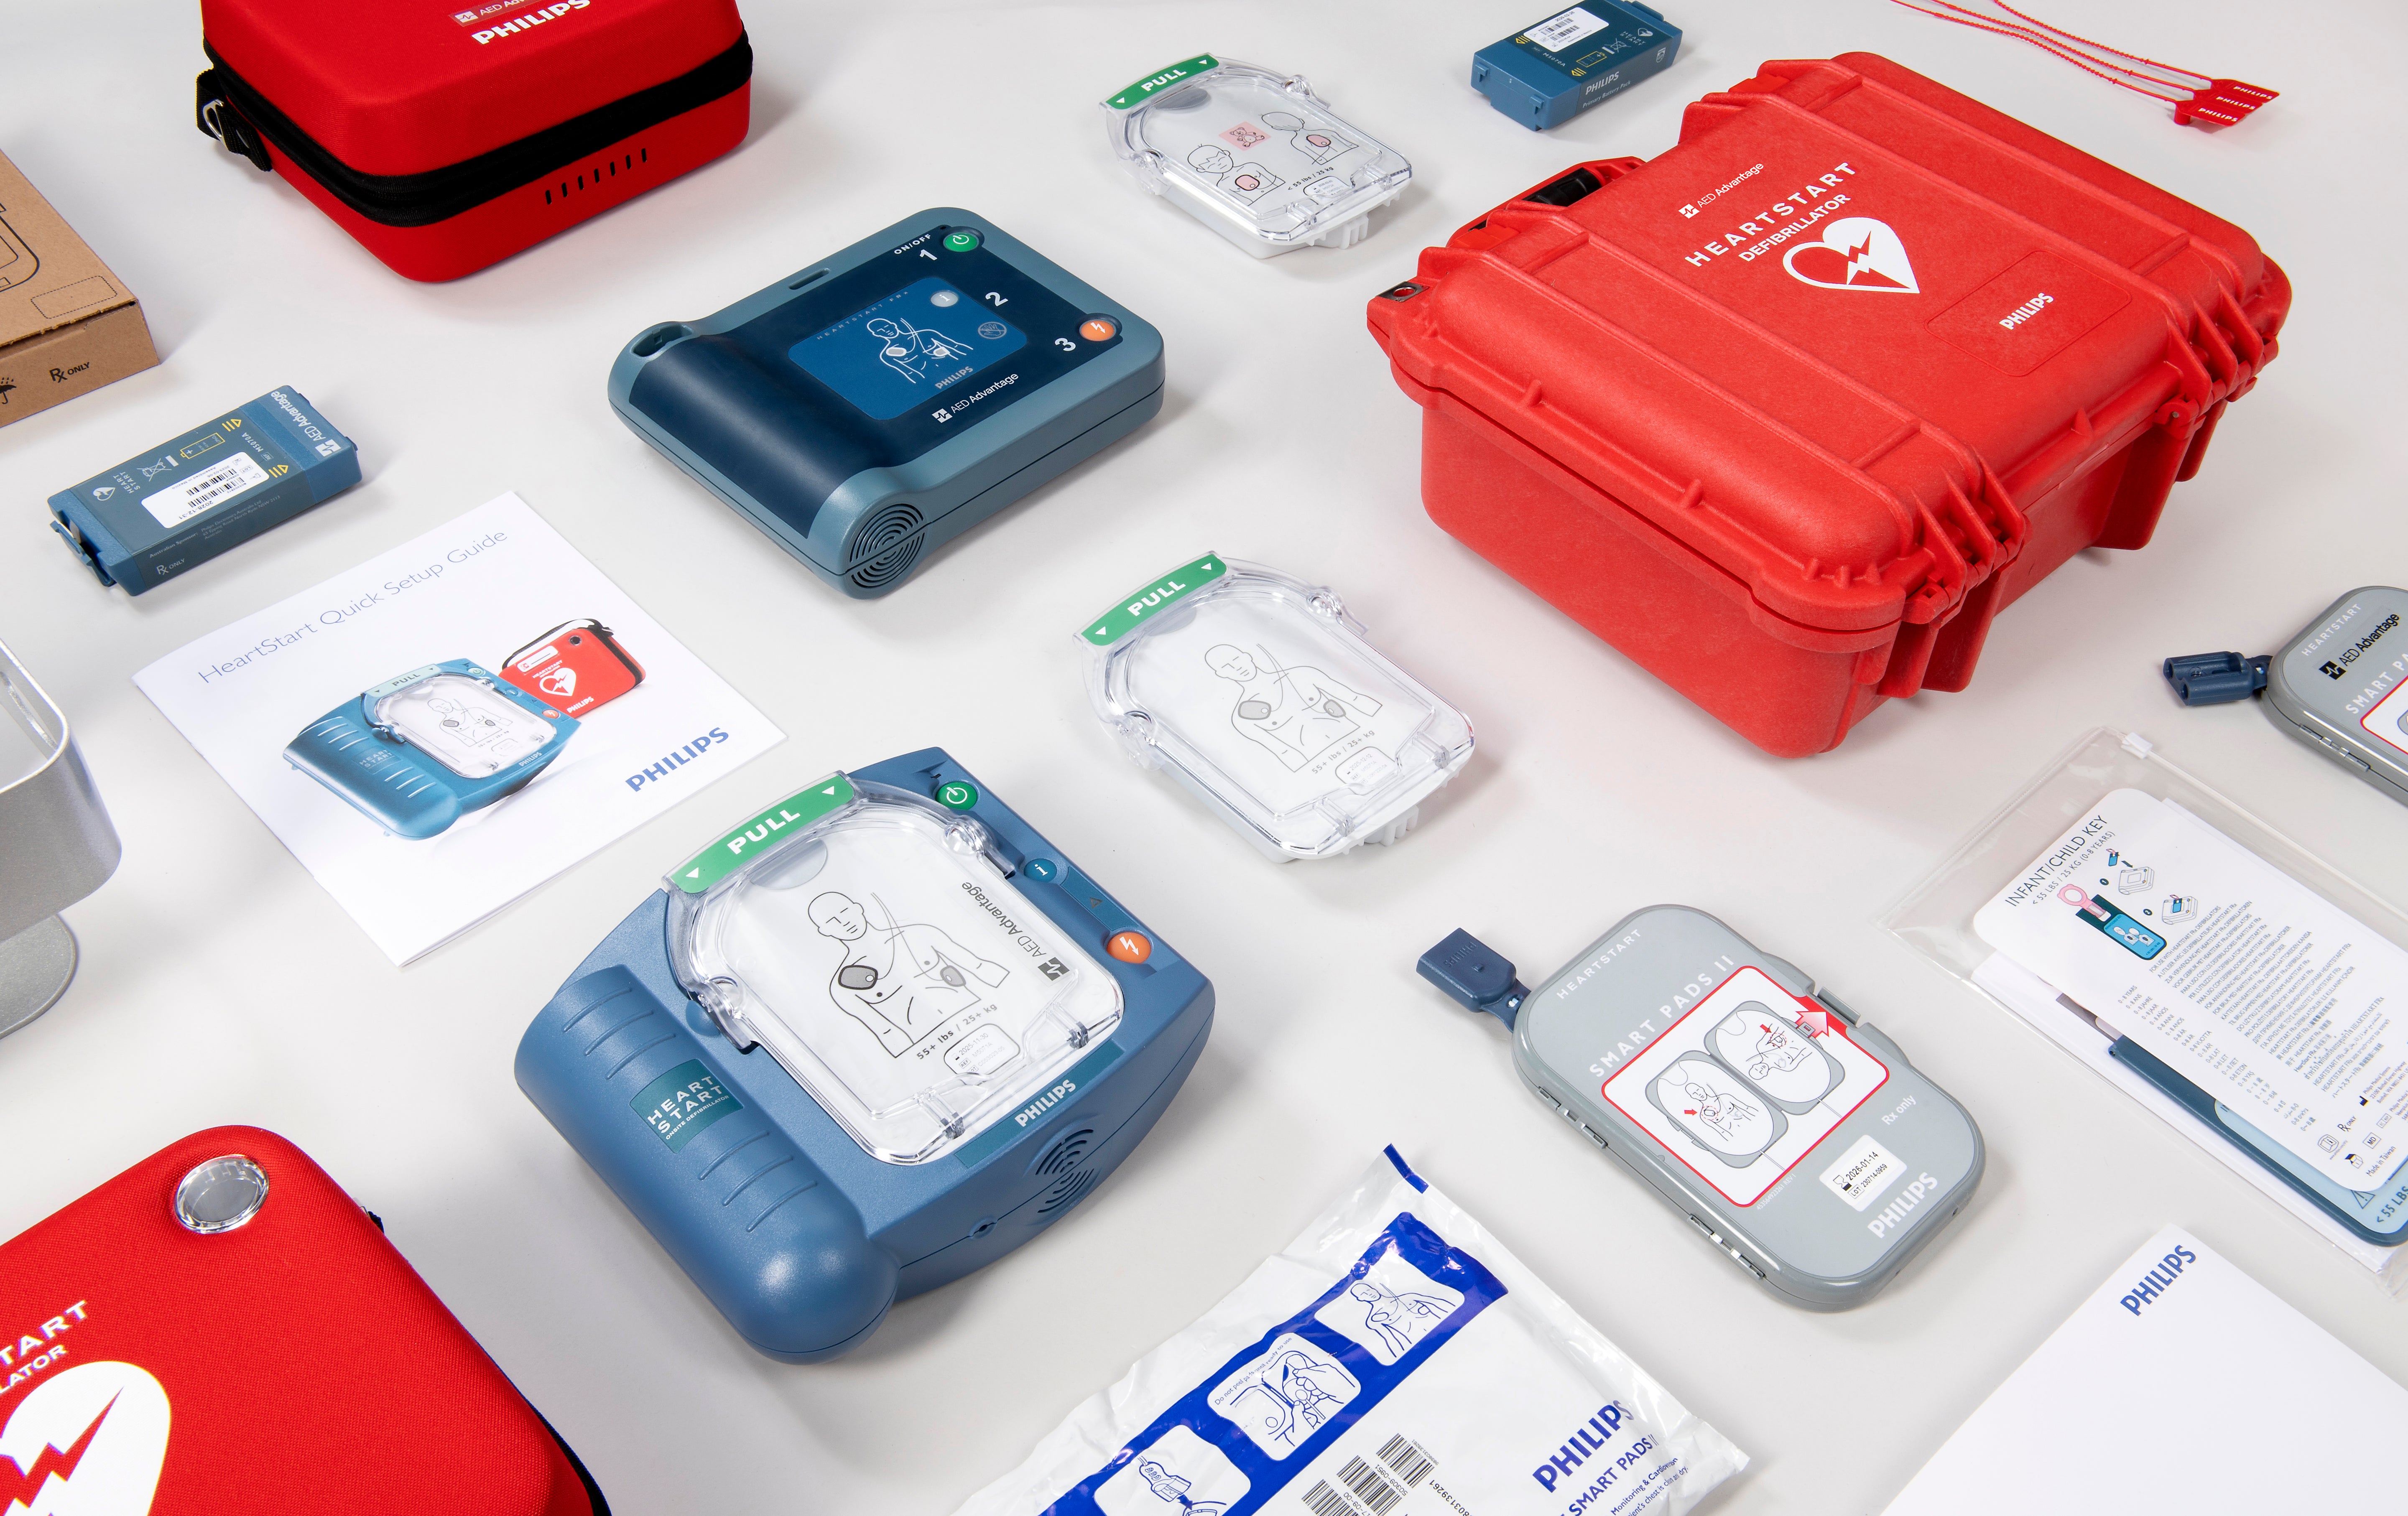 A collage of Philips AEDs and their accessories of various colors.